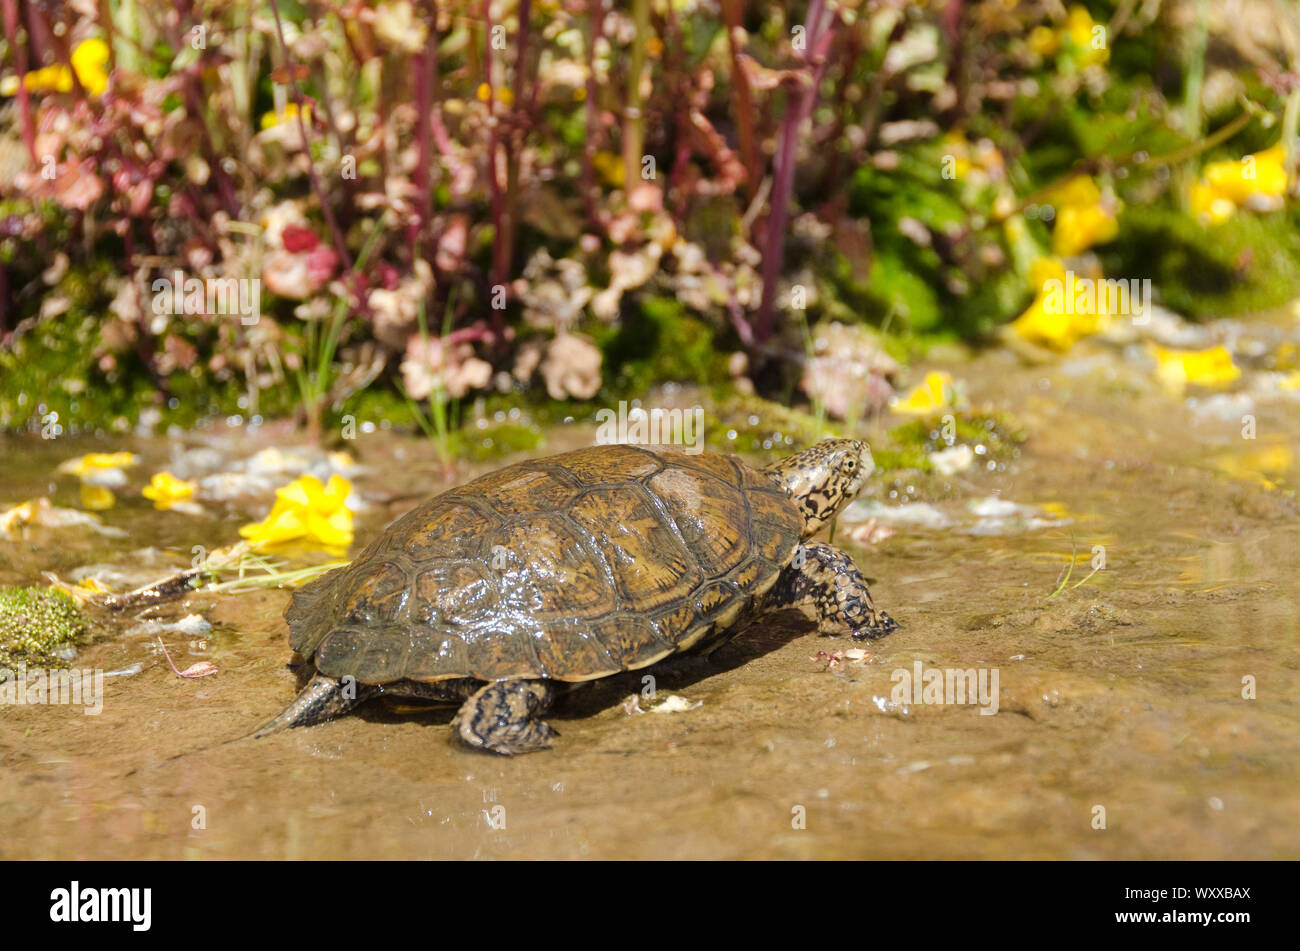 Southern Pacific Pond Turtle. The Southern Pacific Pond Turtle (Actinemys marmorata pallida) occurs from just south of San Francisco Bay to Baja Calif Stock Photo